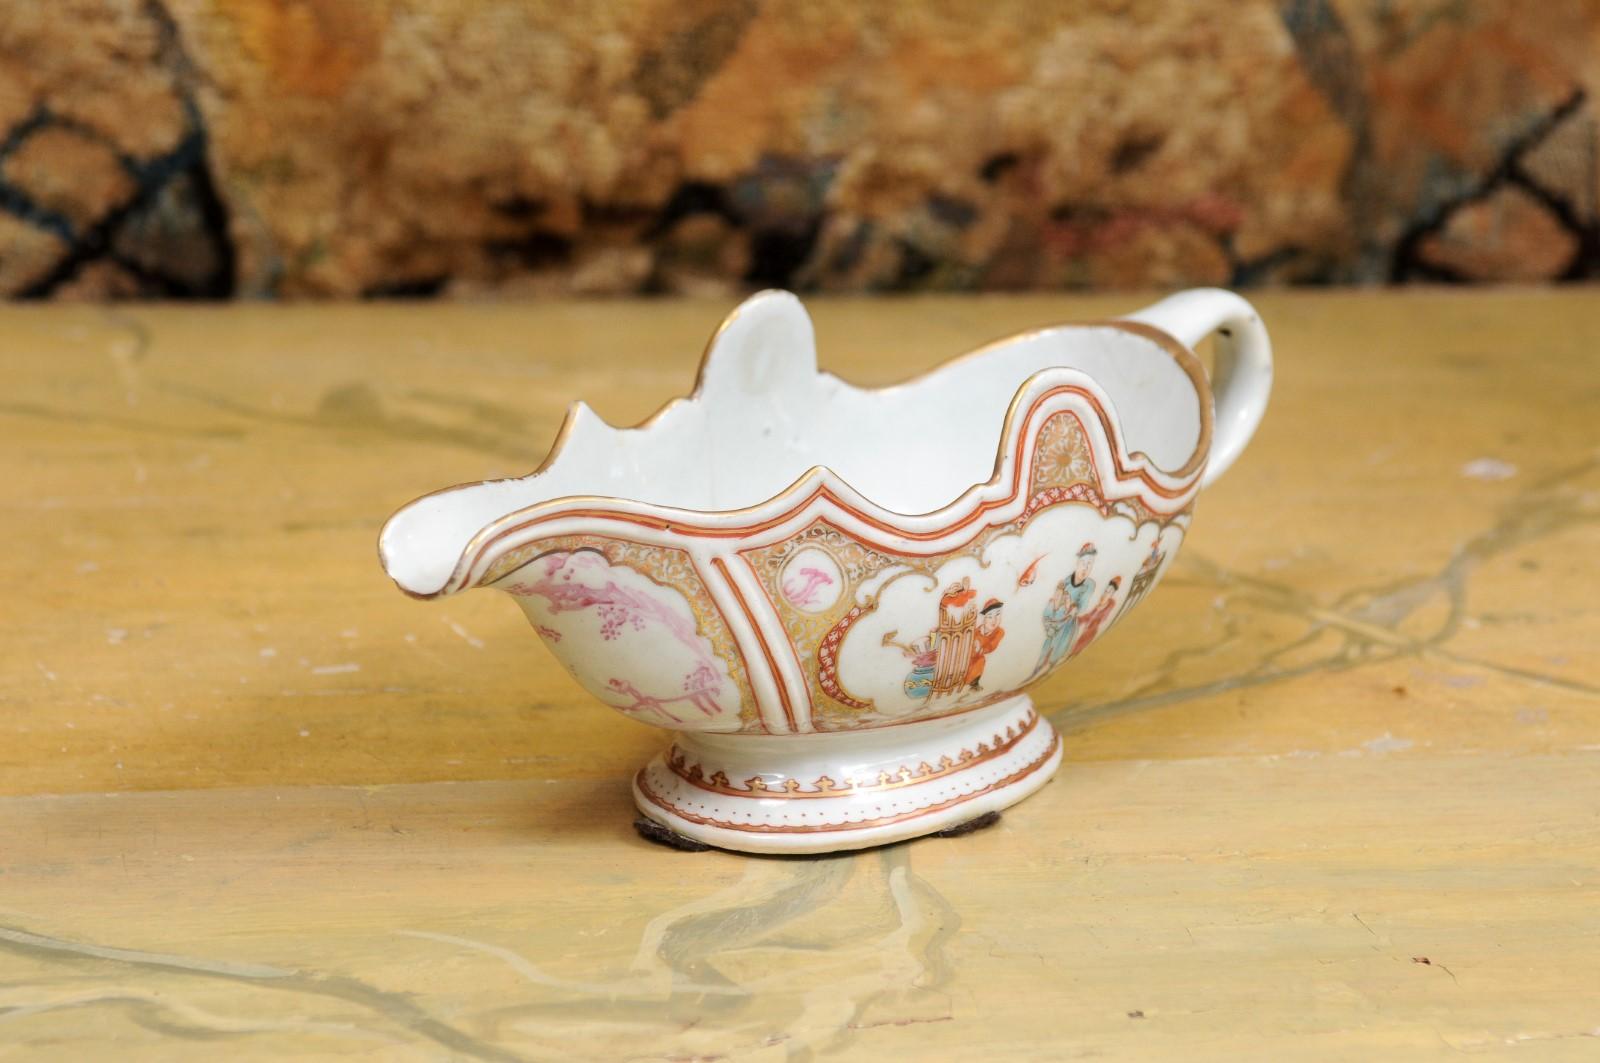  Late 18th Century Chinese Export Porcelain Sauce Boat For Sale 4